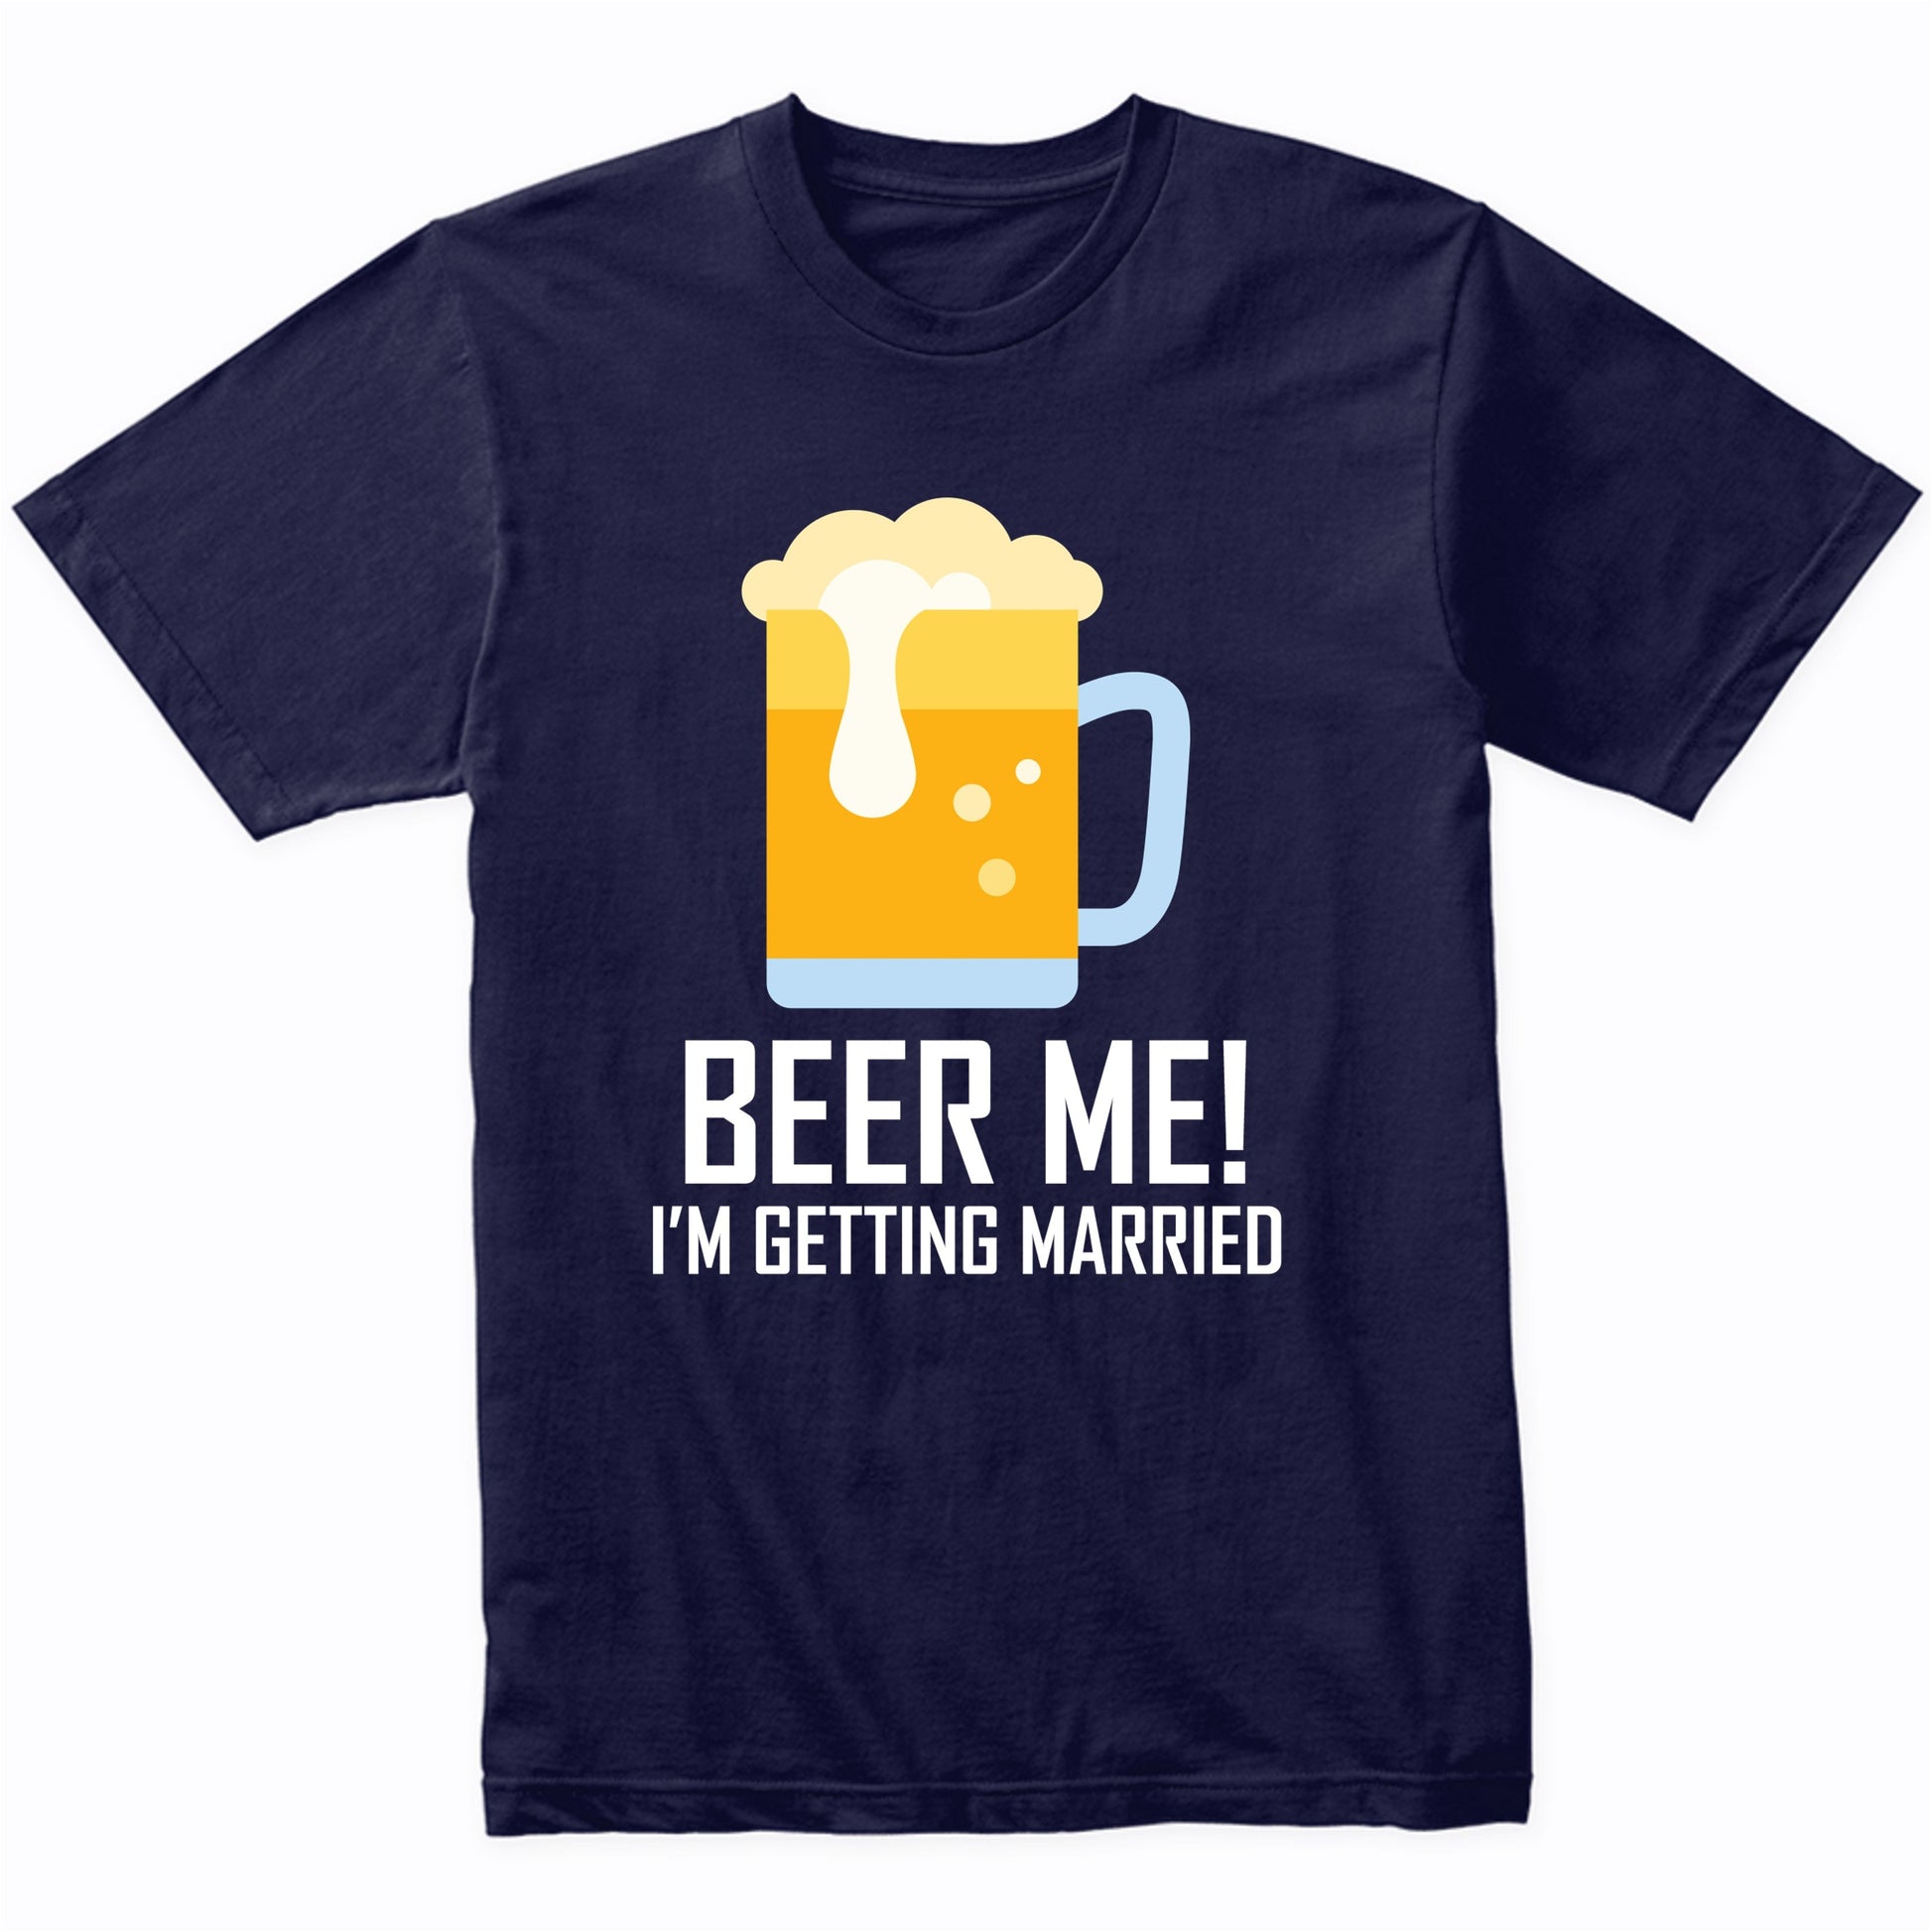 Funny Bachelor Party Shirt Beer Me I'm Getting Married